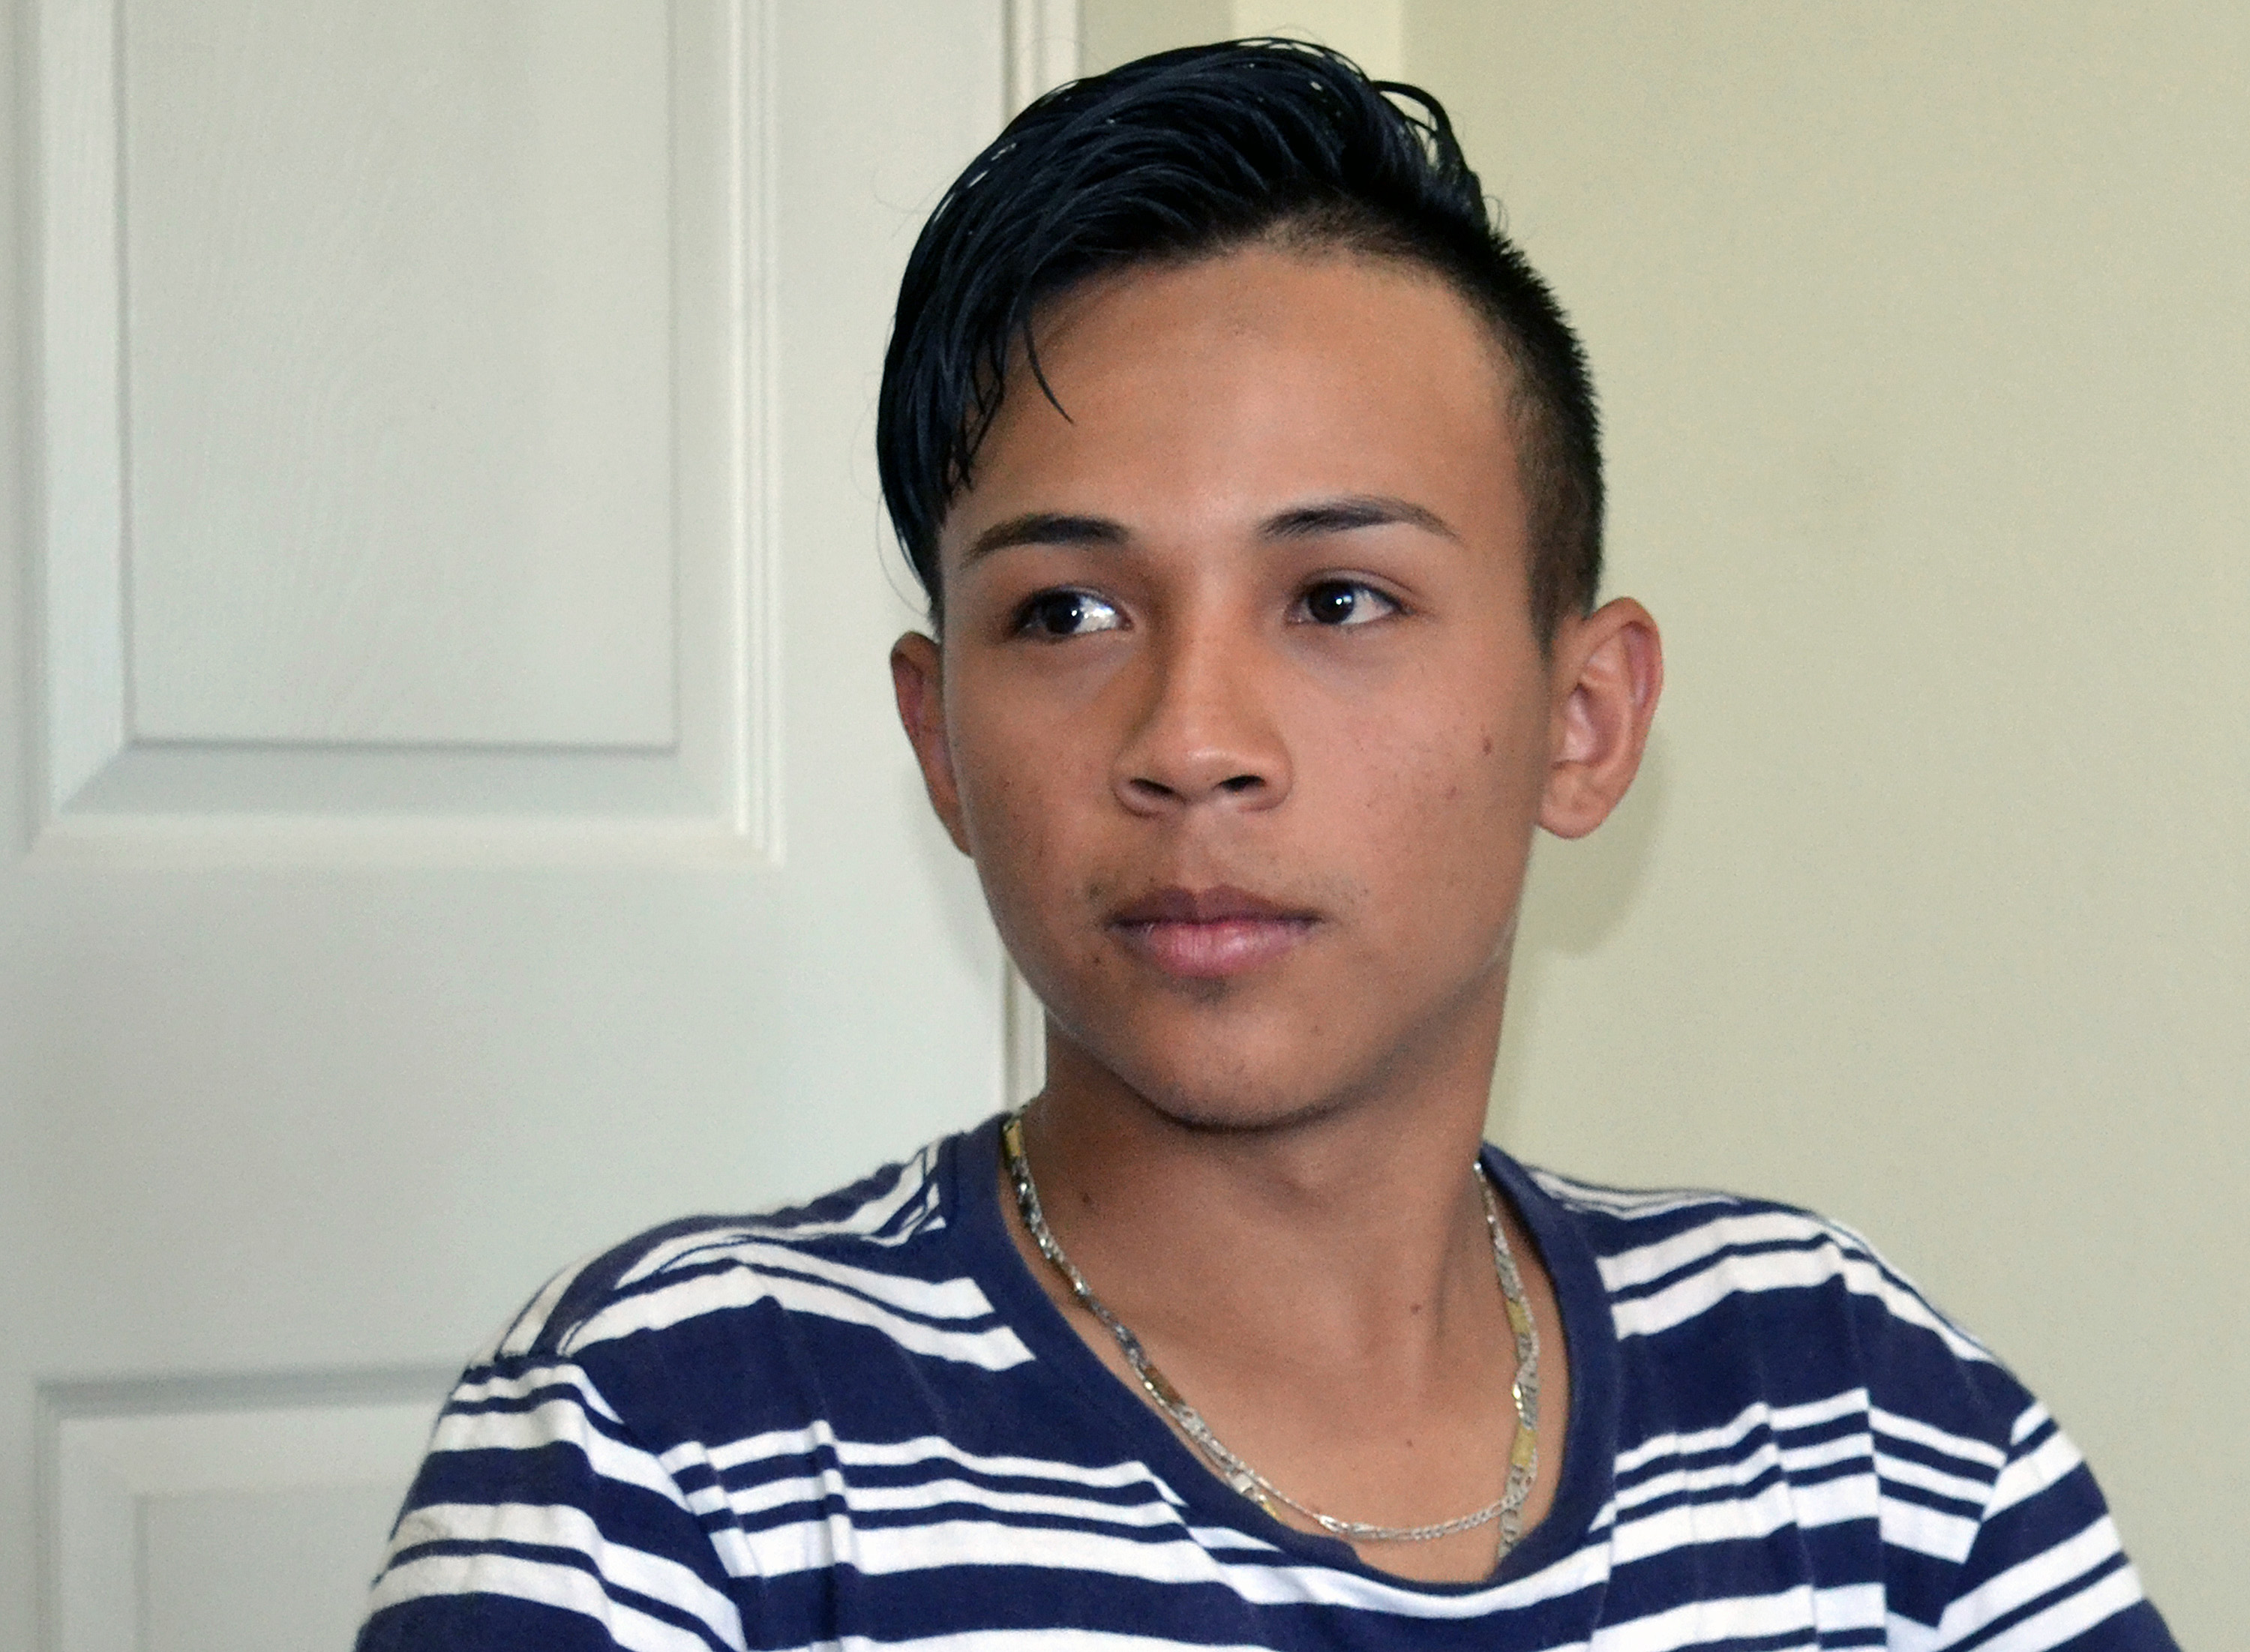 Fernando, 19, relates his experience fleeing gang violence in Tegucigalpa, Honduras, and trying to make his way to the United States. Photo by Carlos Reyes, UMNS-NPHLM.